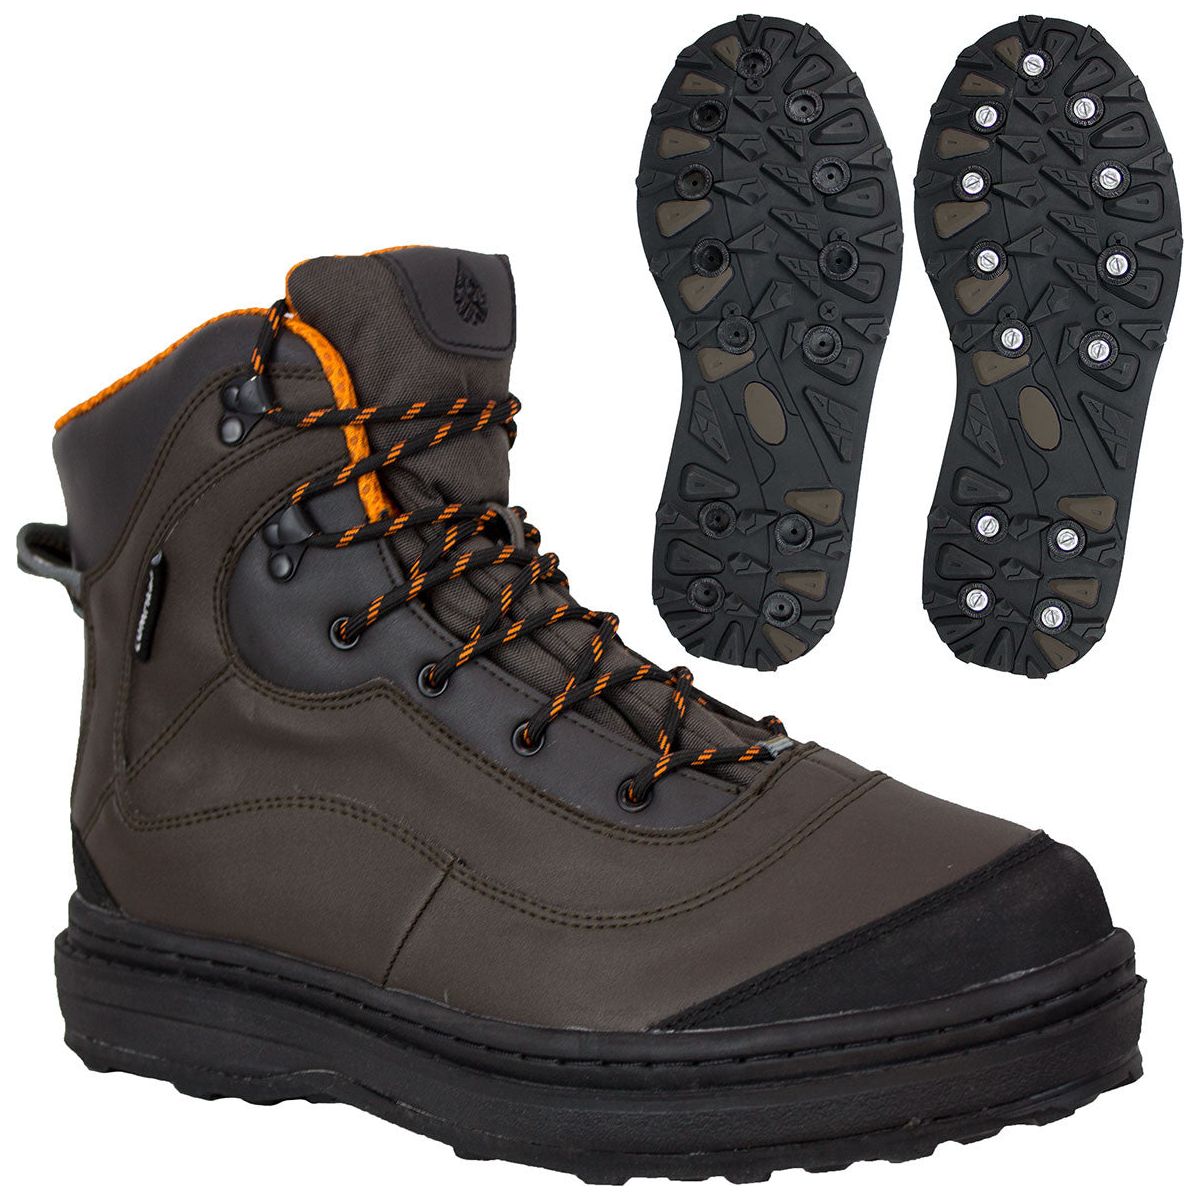 Compass 360 Tailwater II Cleated Sole Wading Shoes